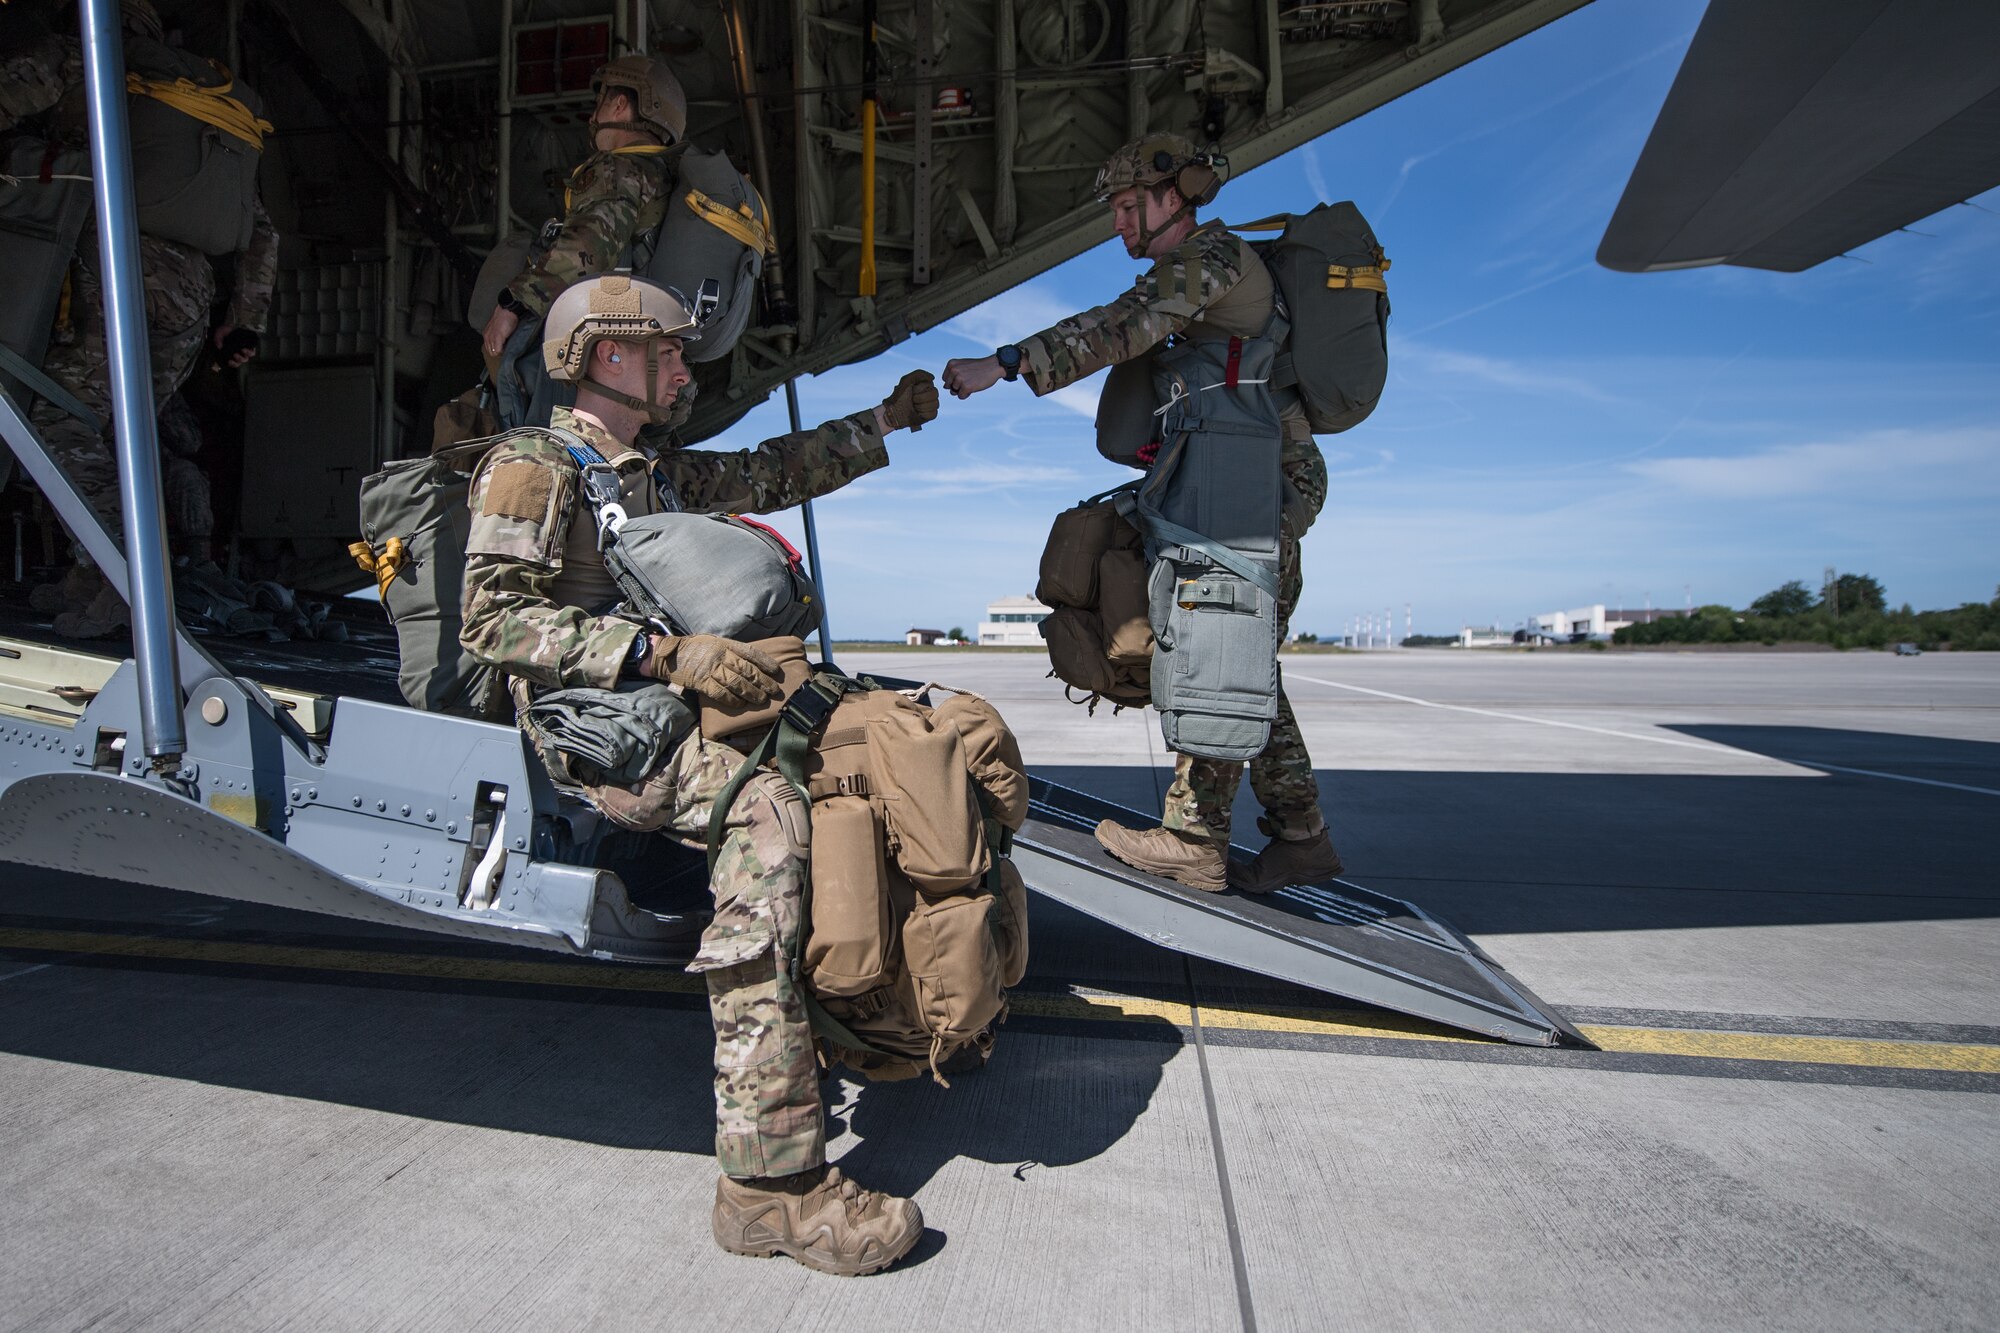 Photo of Airmen bumping fists while boarding an aircraft